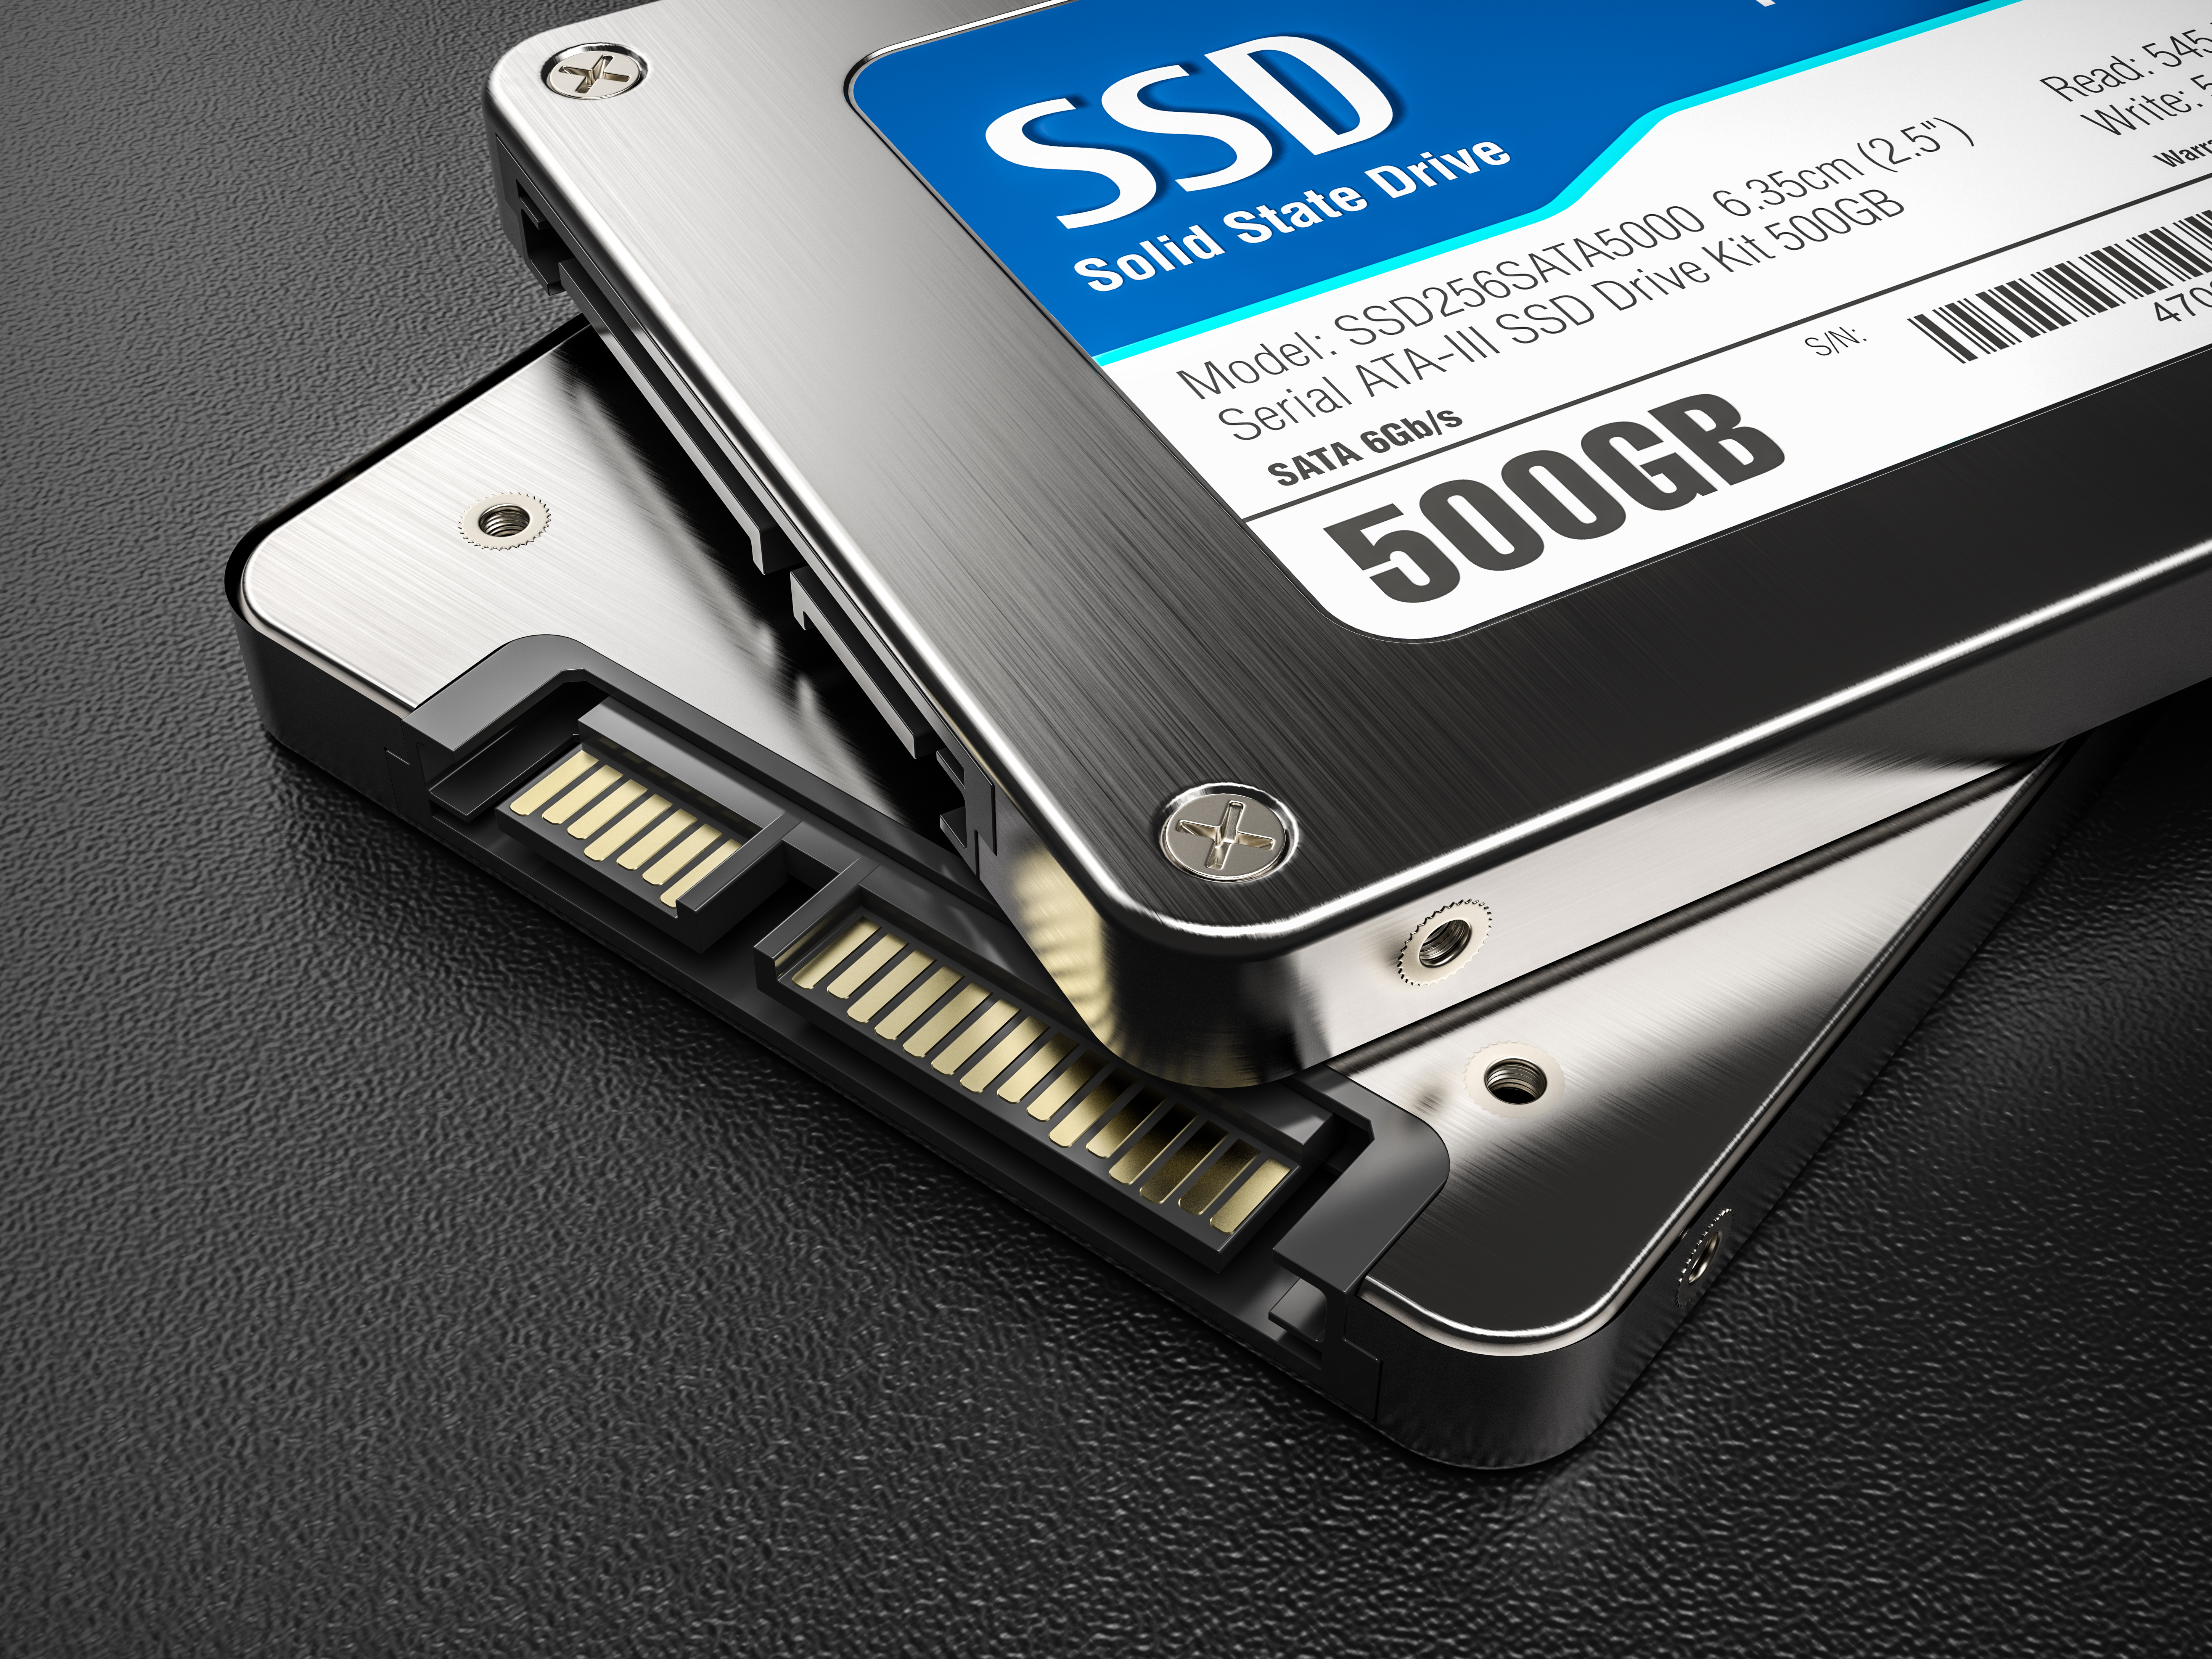 SSD size affect speed in - Insider